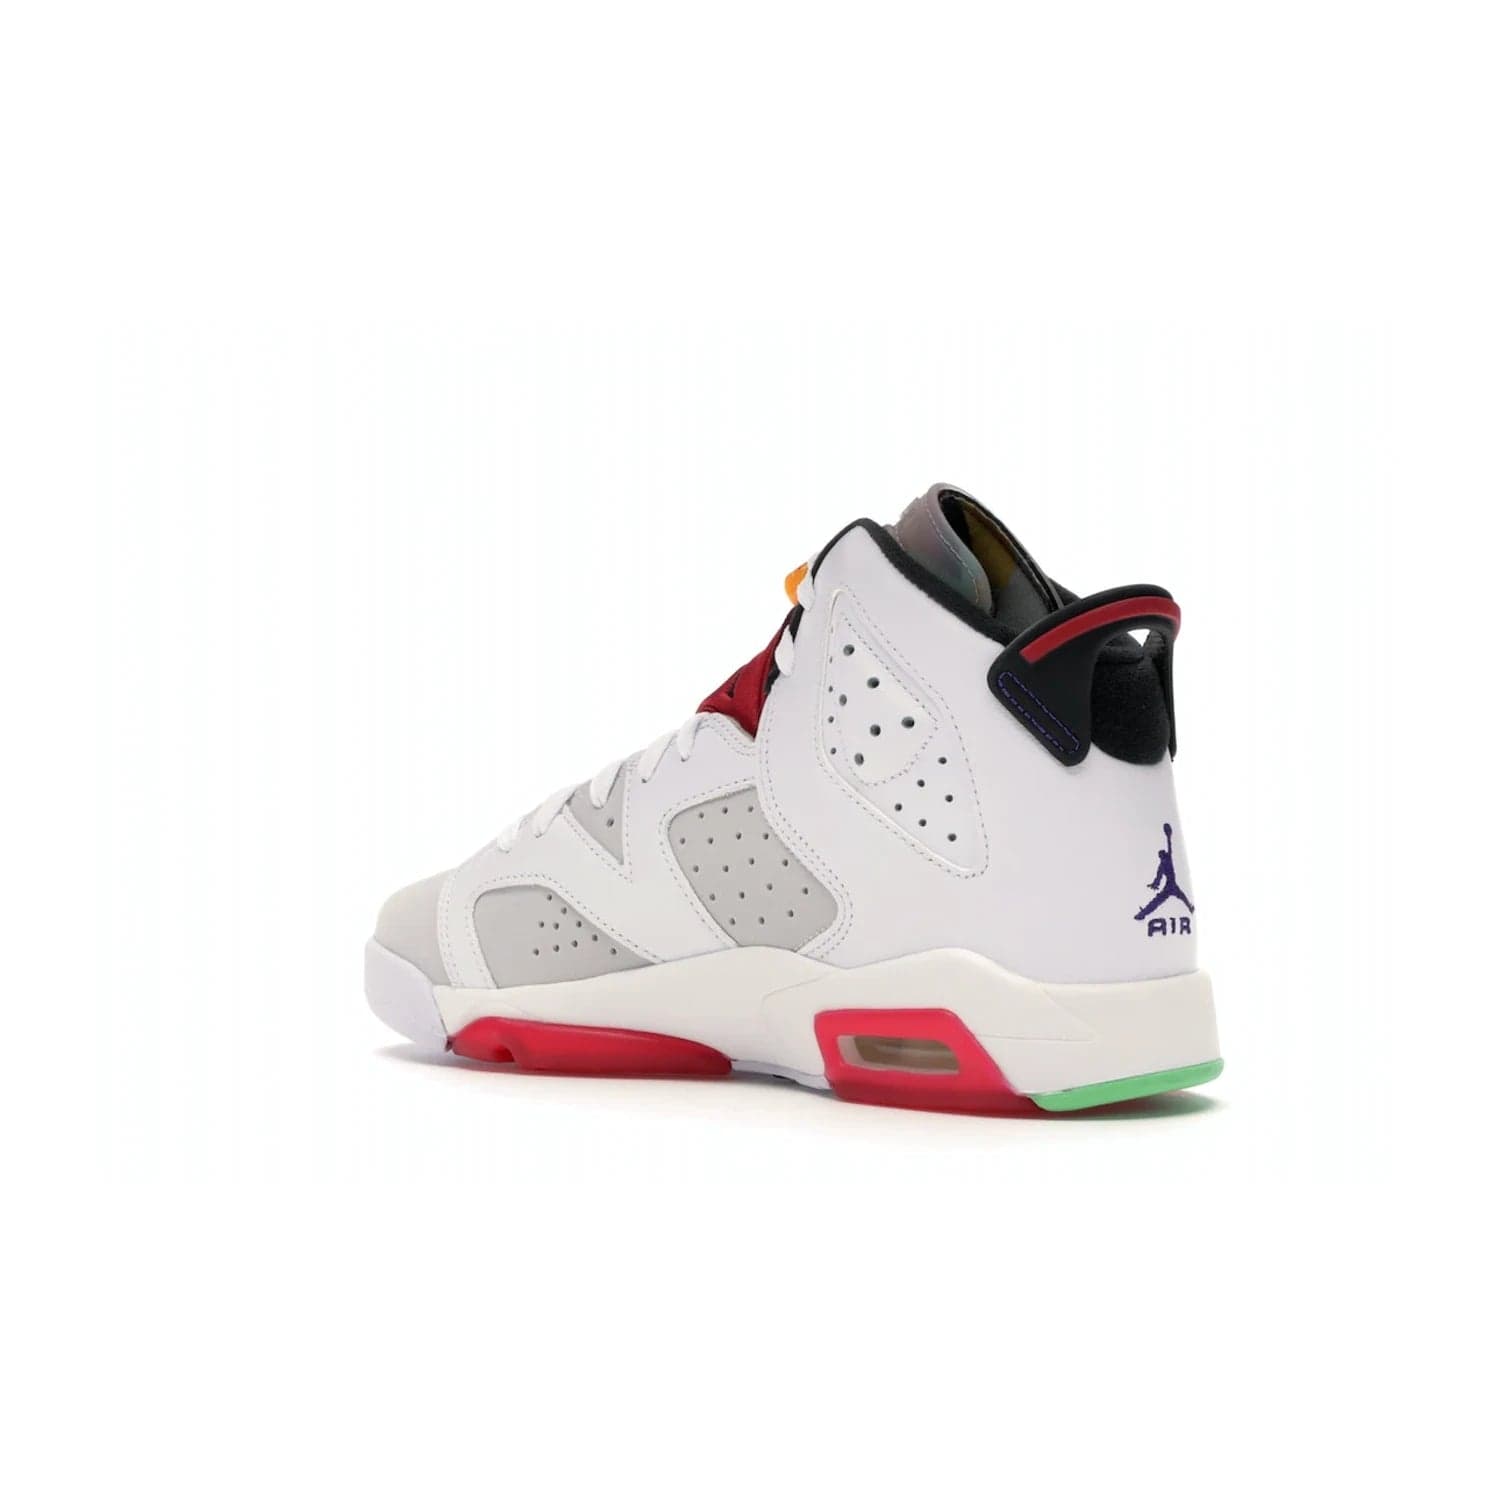 Jordan 6 Retro Hare (GS) - Image 23 - Only at www.BallersClubKickz.com - The Air Jordan 6 Hare GS. Comfortable suede upper, perforations, red pods, two-tone midsole, and signature "Jumpman" emblem. Released 17 June 2020. Perfect for any sneakerhead.